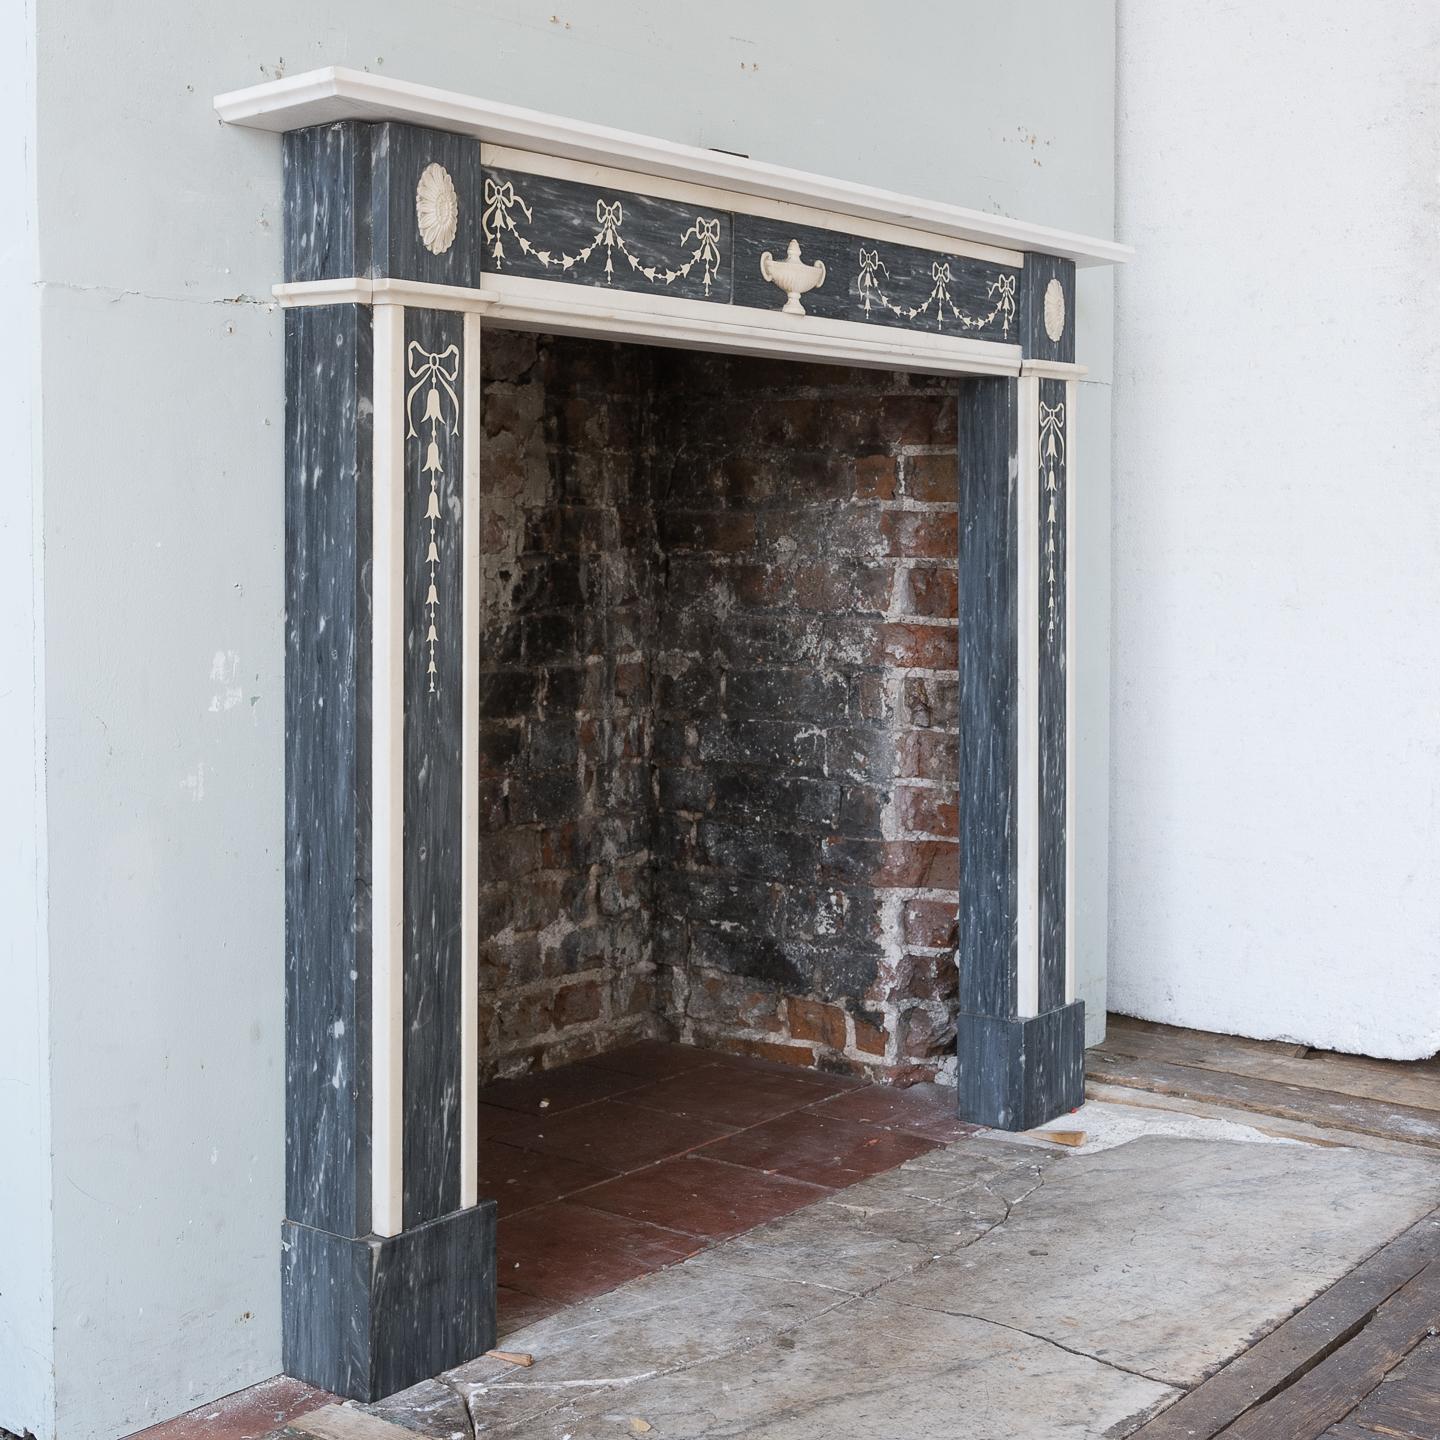 Regency neoclassical inlaid dove grey and statuary marble fireplace, the moulded shelf above frieze with delicate scagliola inlay of swags and tied ribbons, centered by plaque with carved urn, the corner-blocks with carved paterae above jambs with